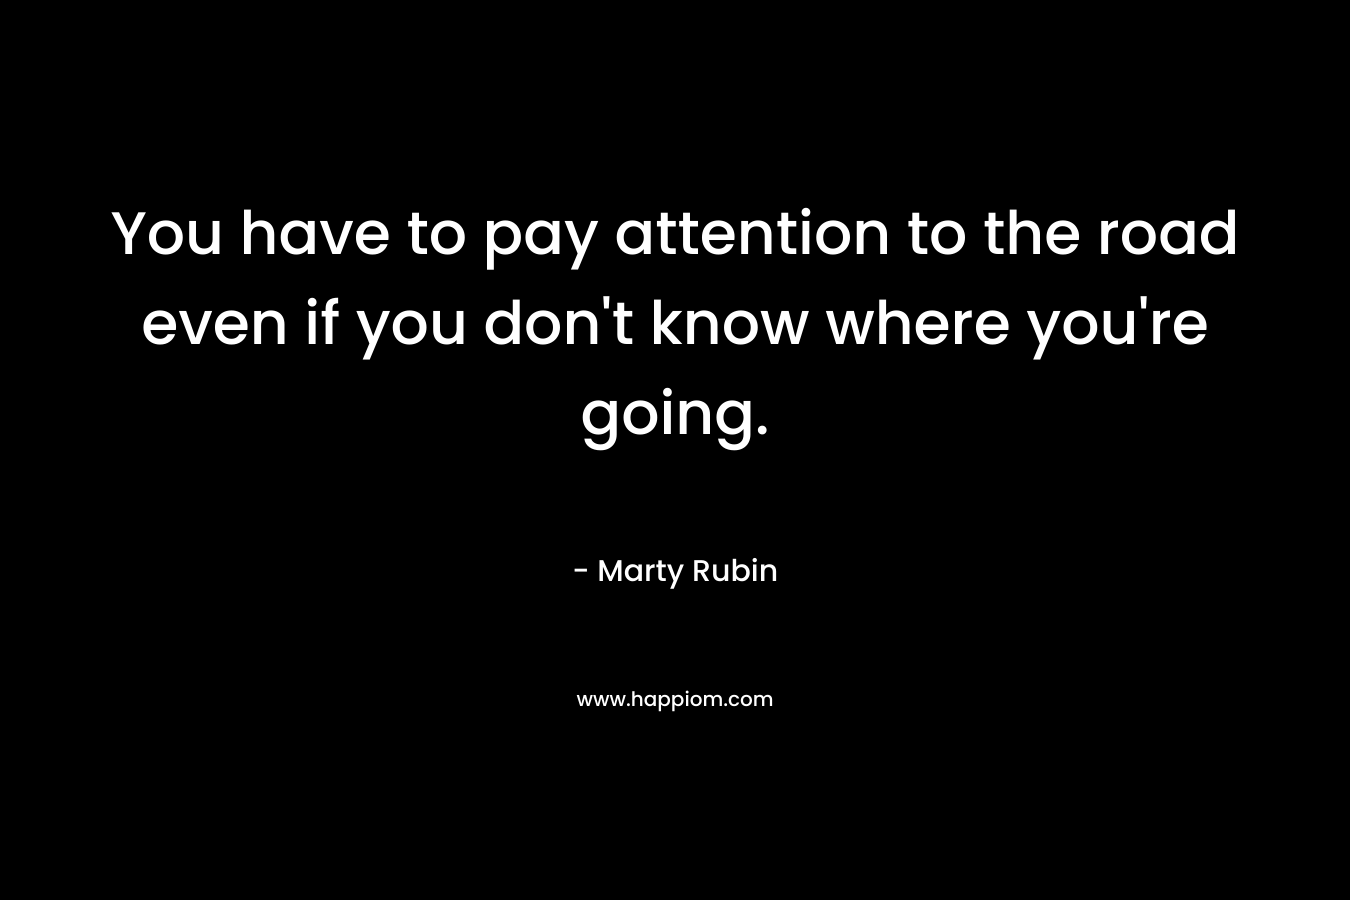 You have to pay attention to the road even if you don't know where you're going.